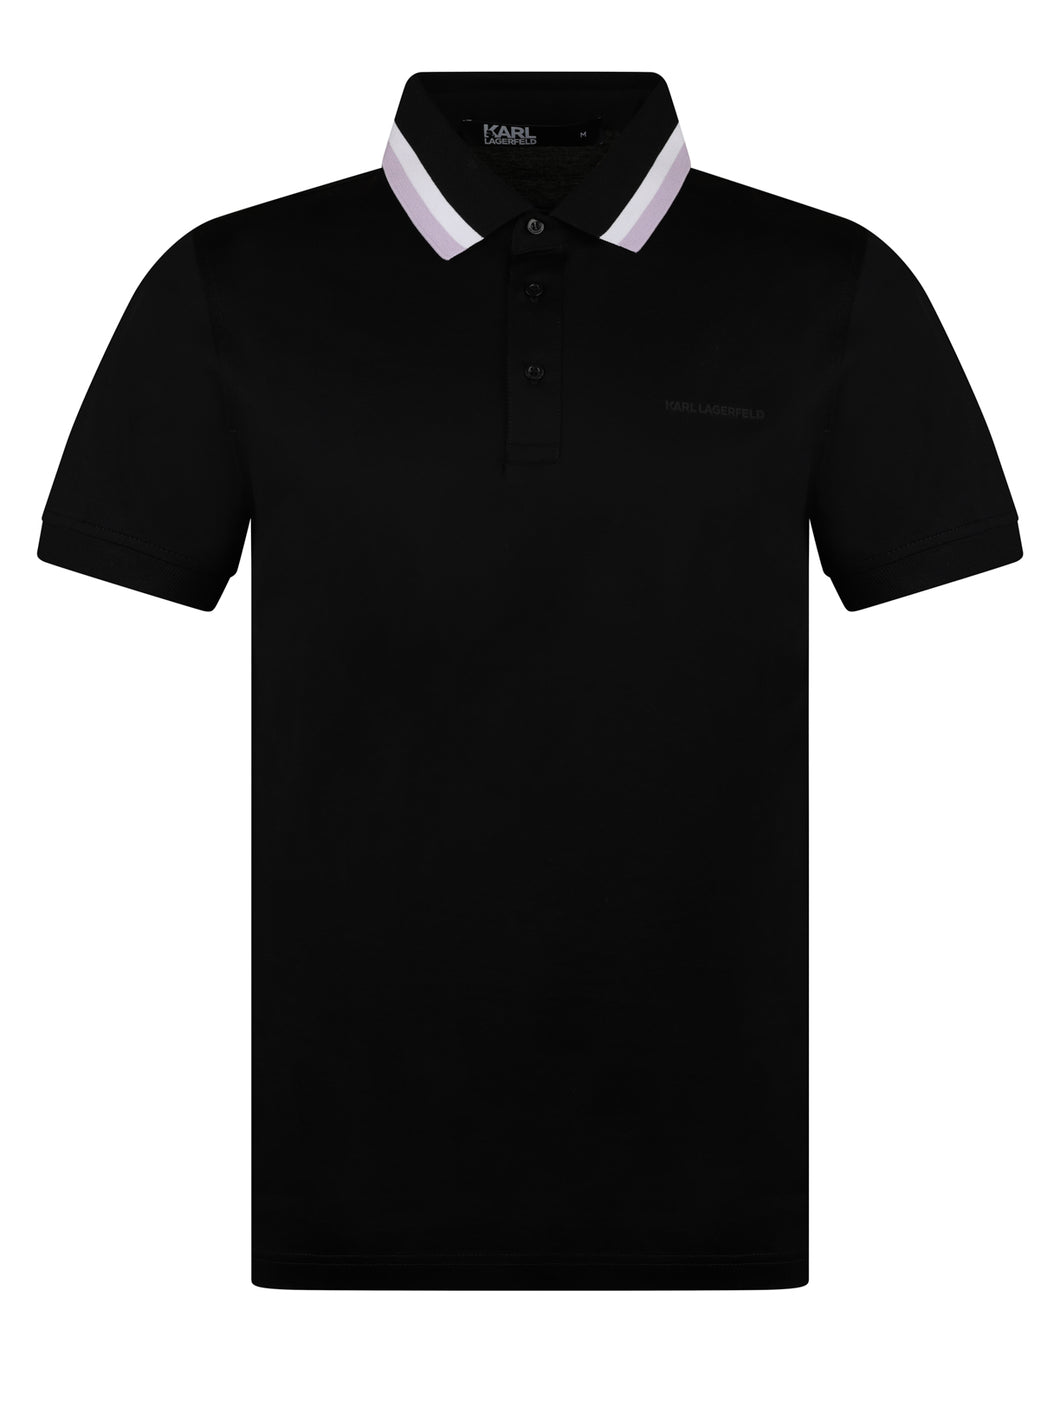 Lagerfeld Tipped Polo Shirt Black